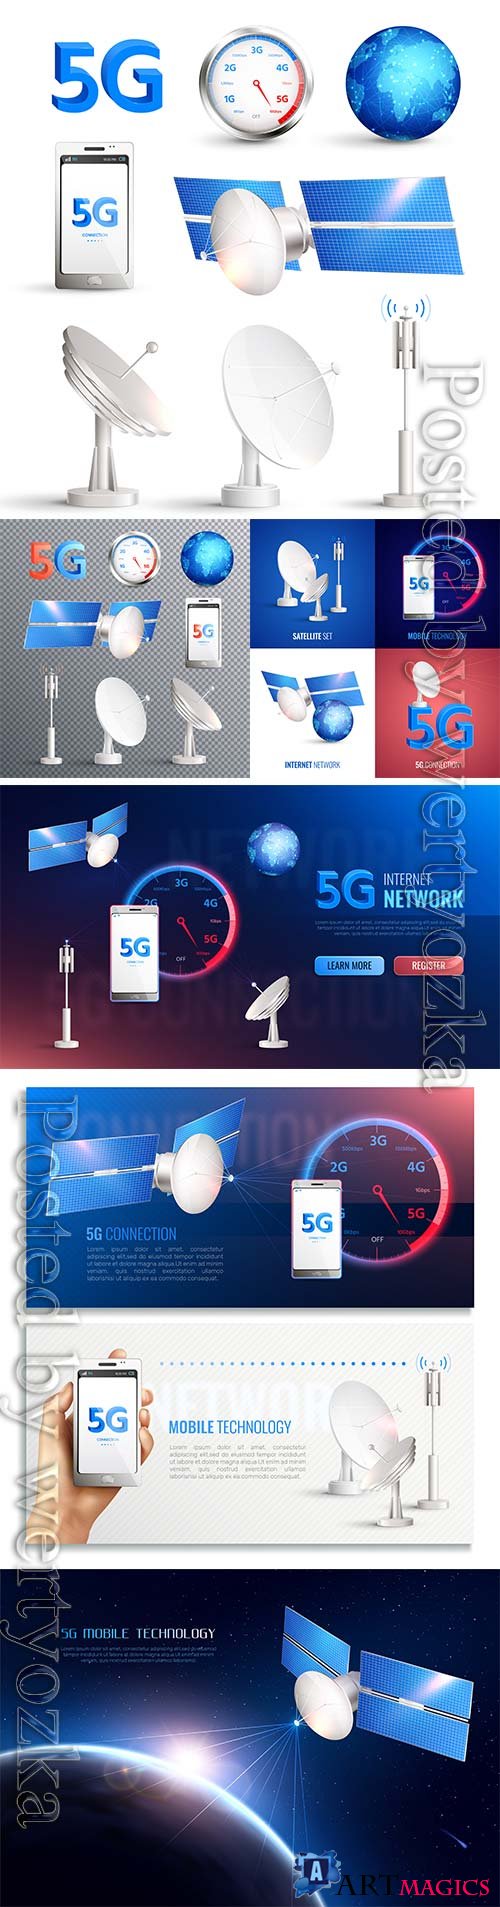 Mobile technology vector icons, broadband internet connection of 5g standard